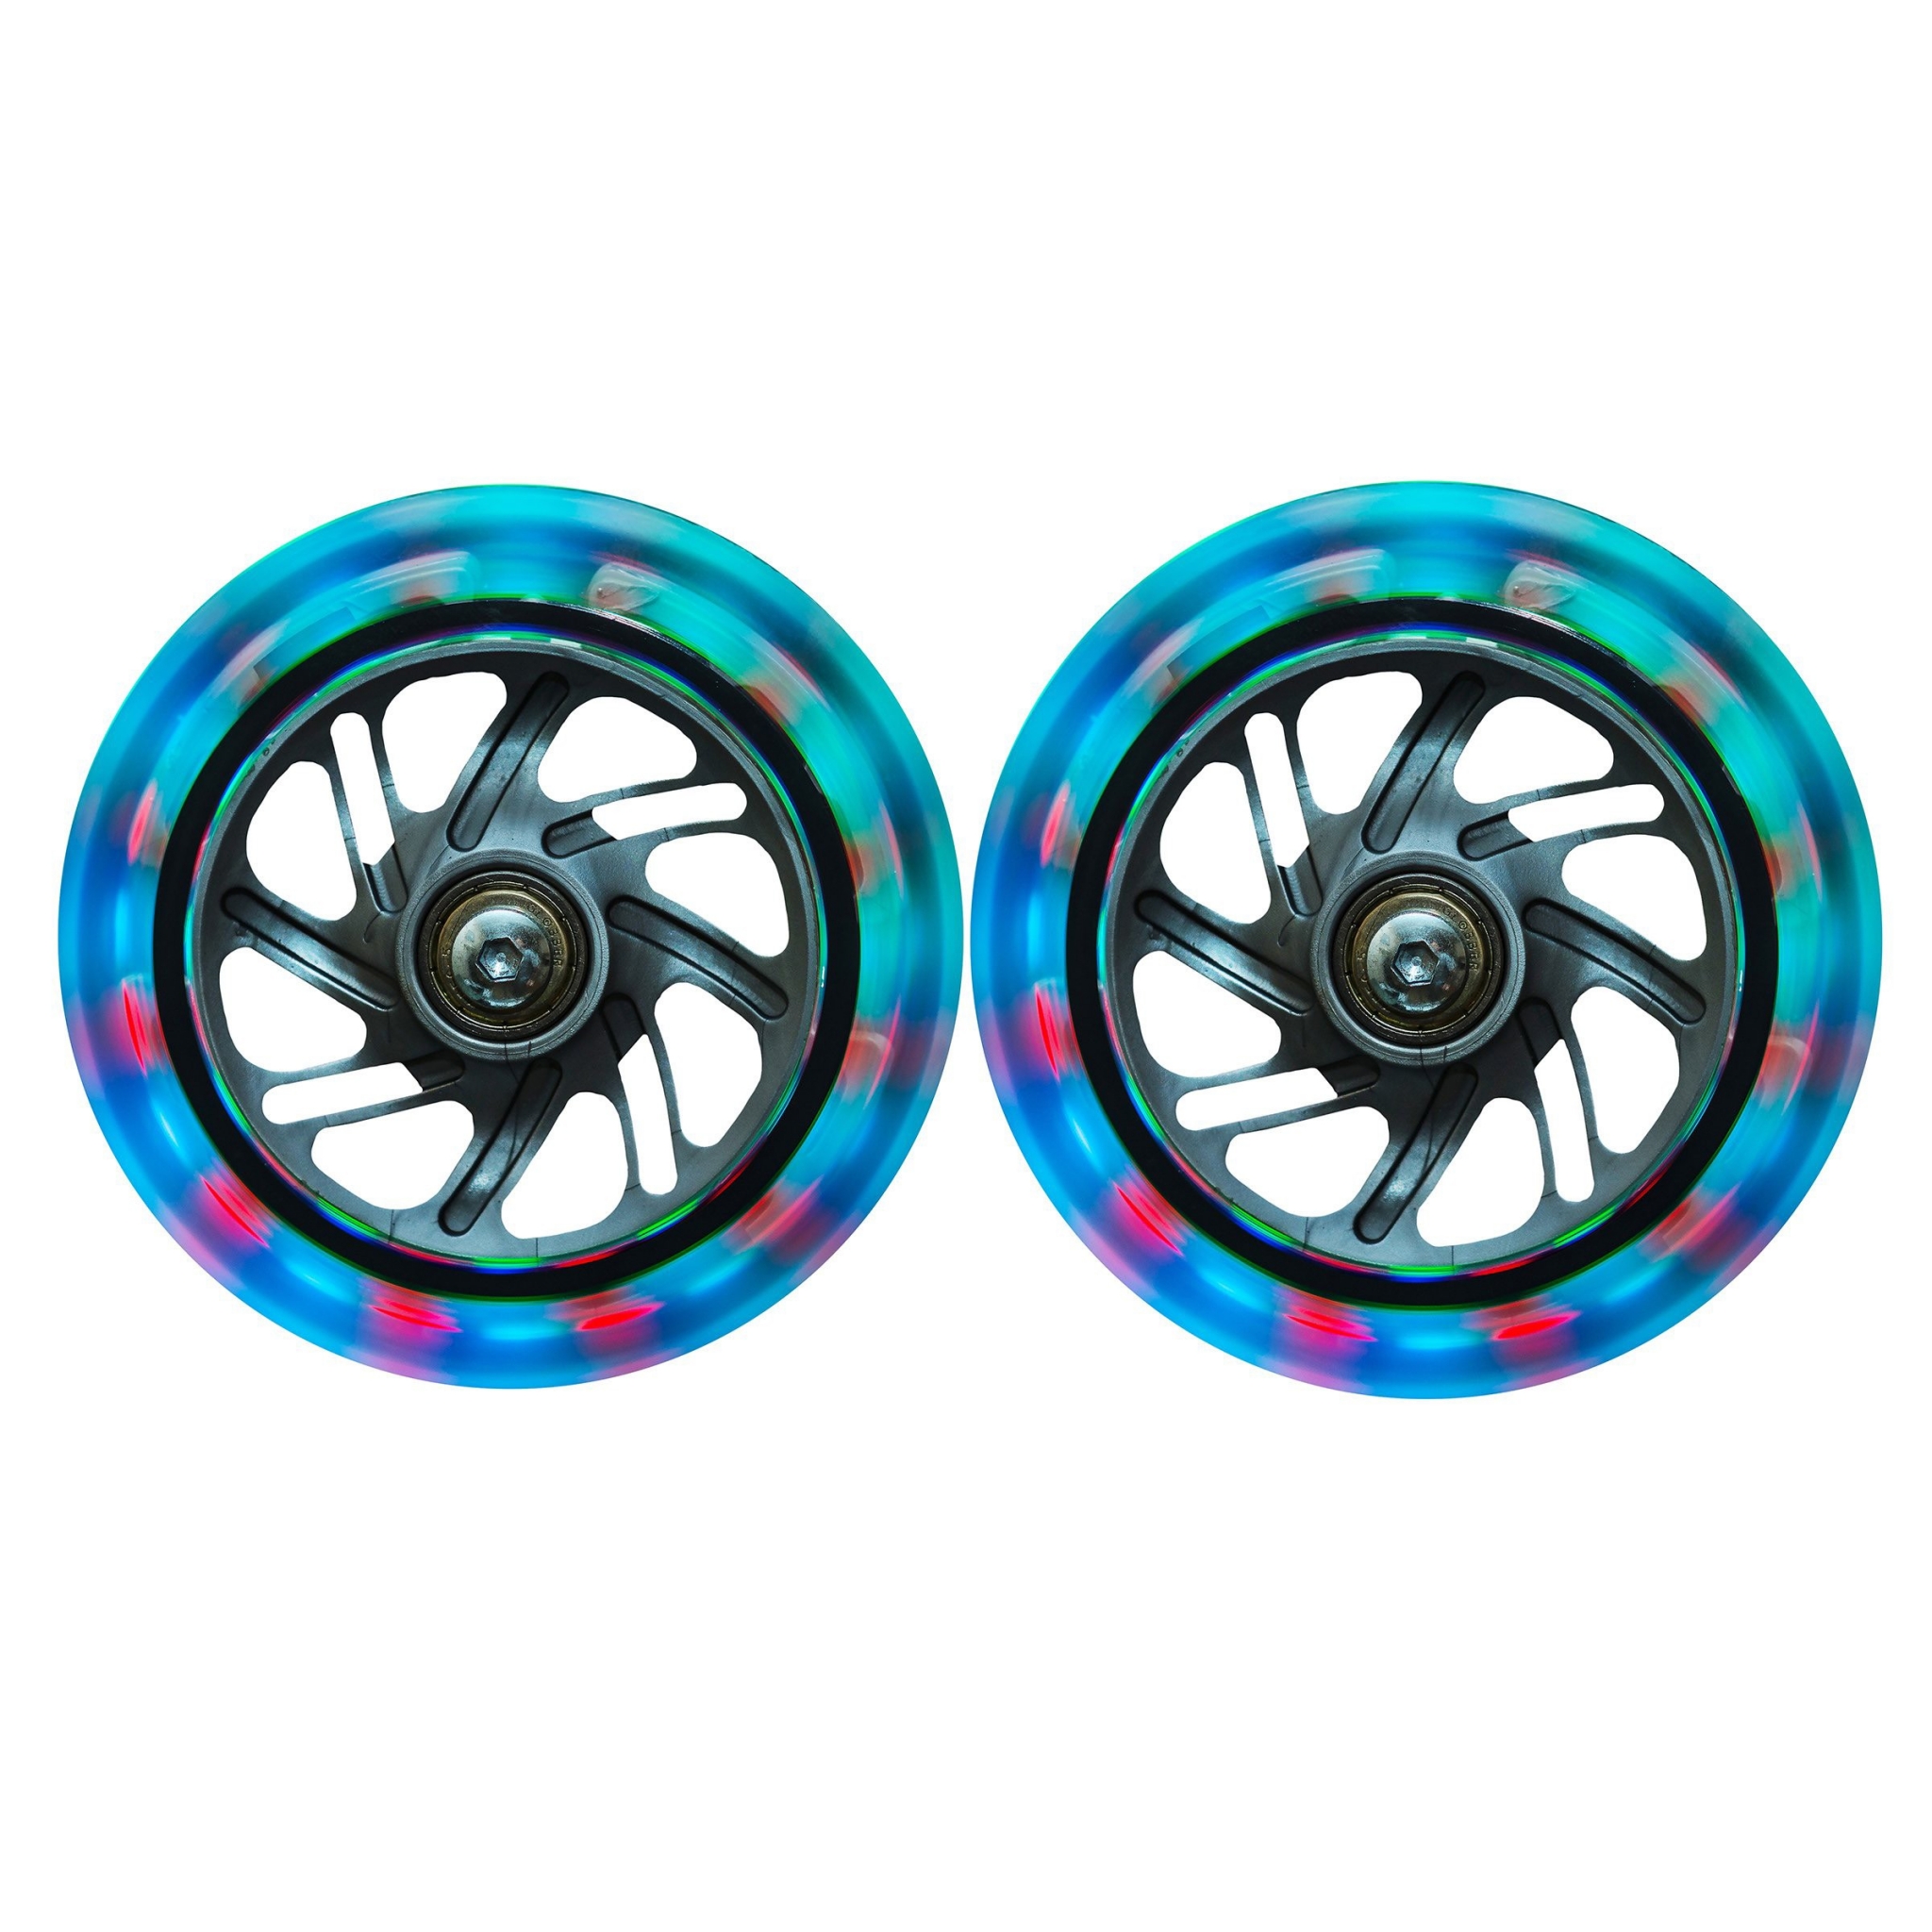 Globber LED wheels accessories for kids - light-up scooter wheels